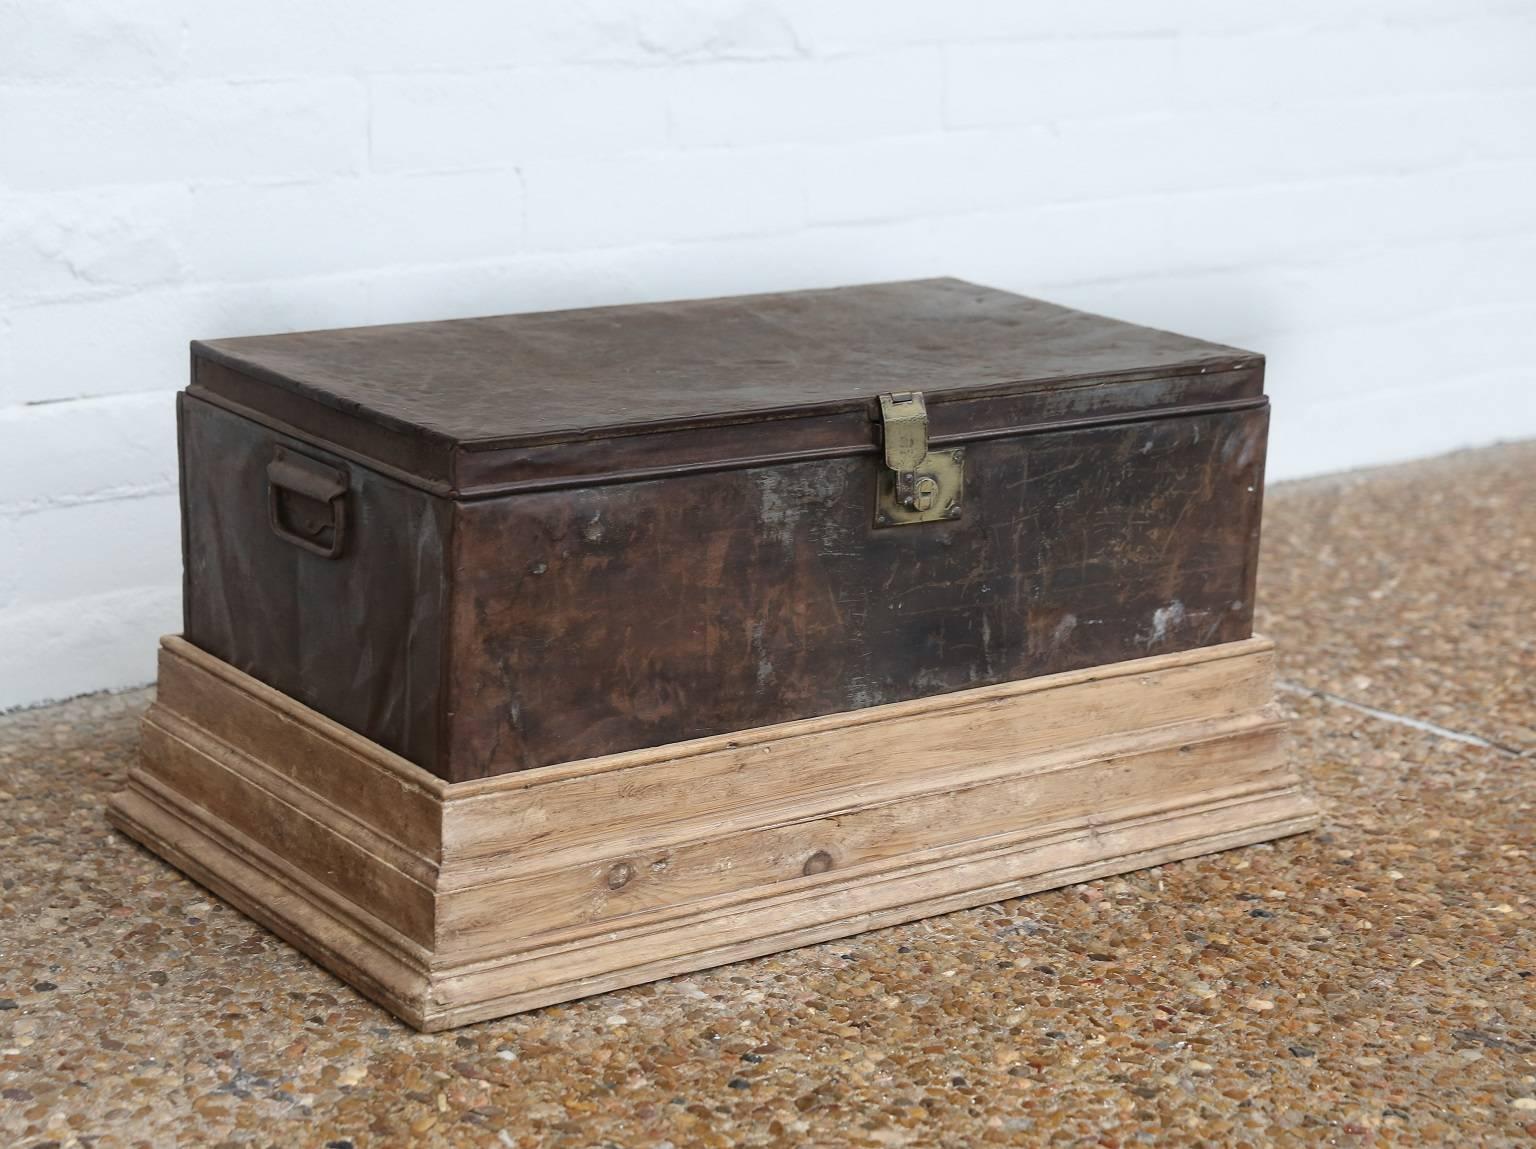 Carved Early 20th Century Metal Trunk Set into Plinth